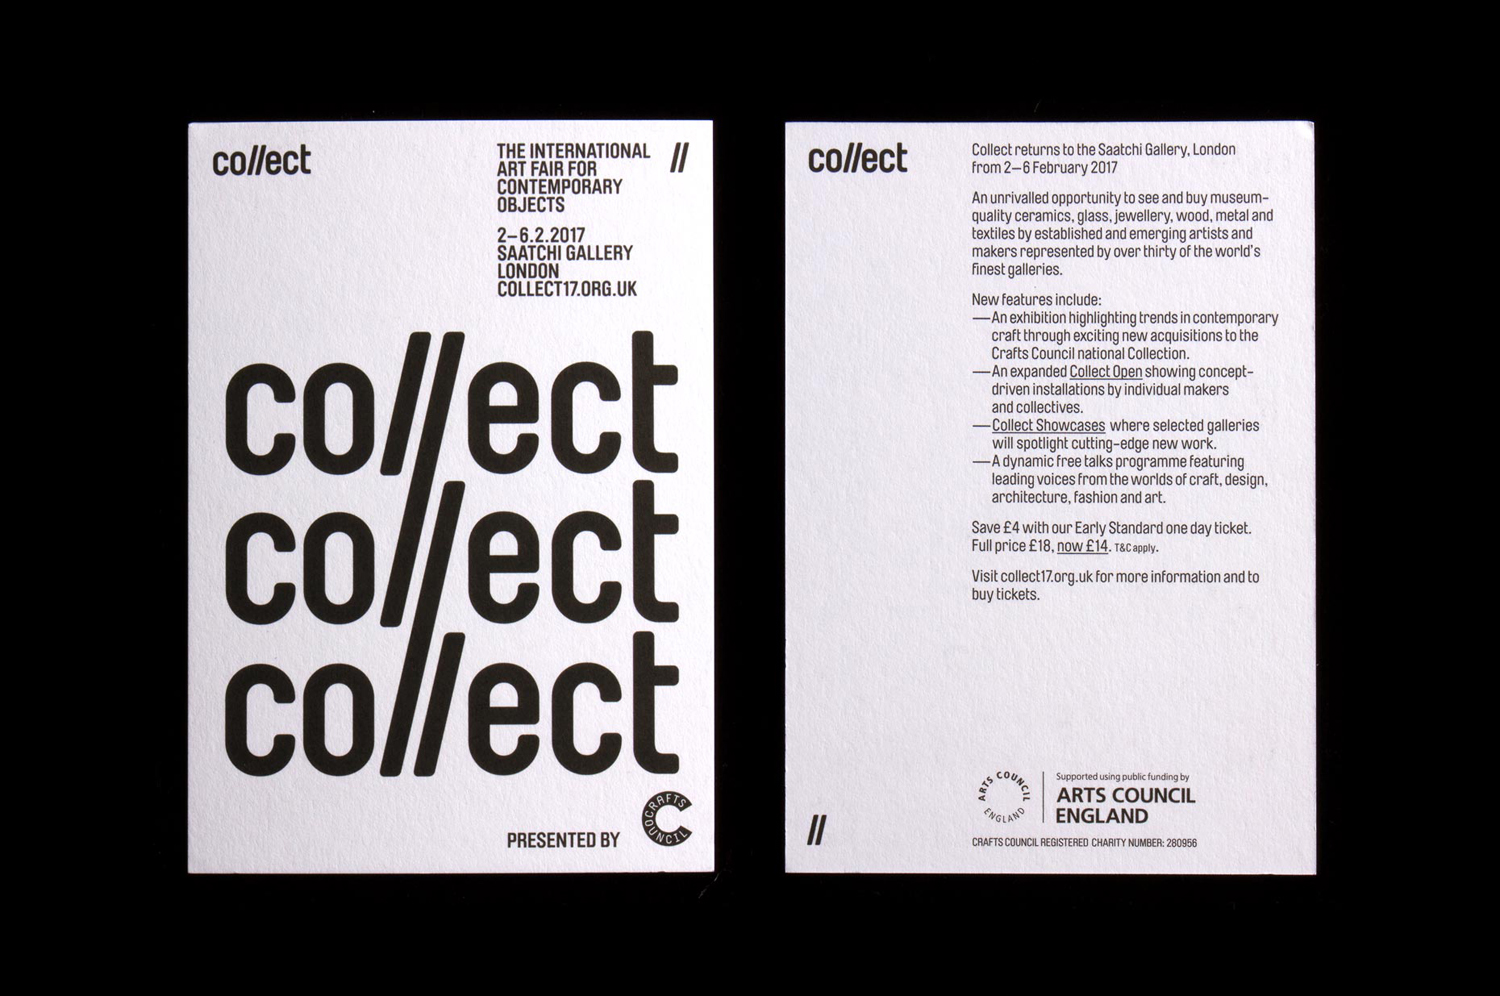 Brand identity and print for contemporary international art fair Collect, designed by Spin, London, UK